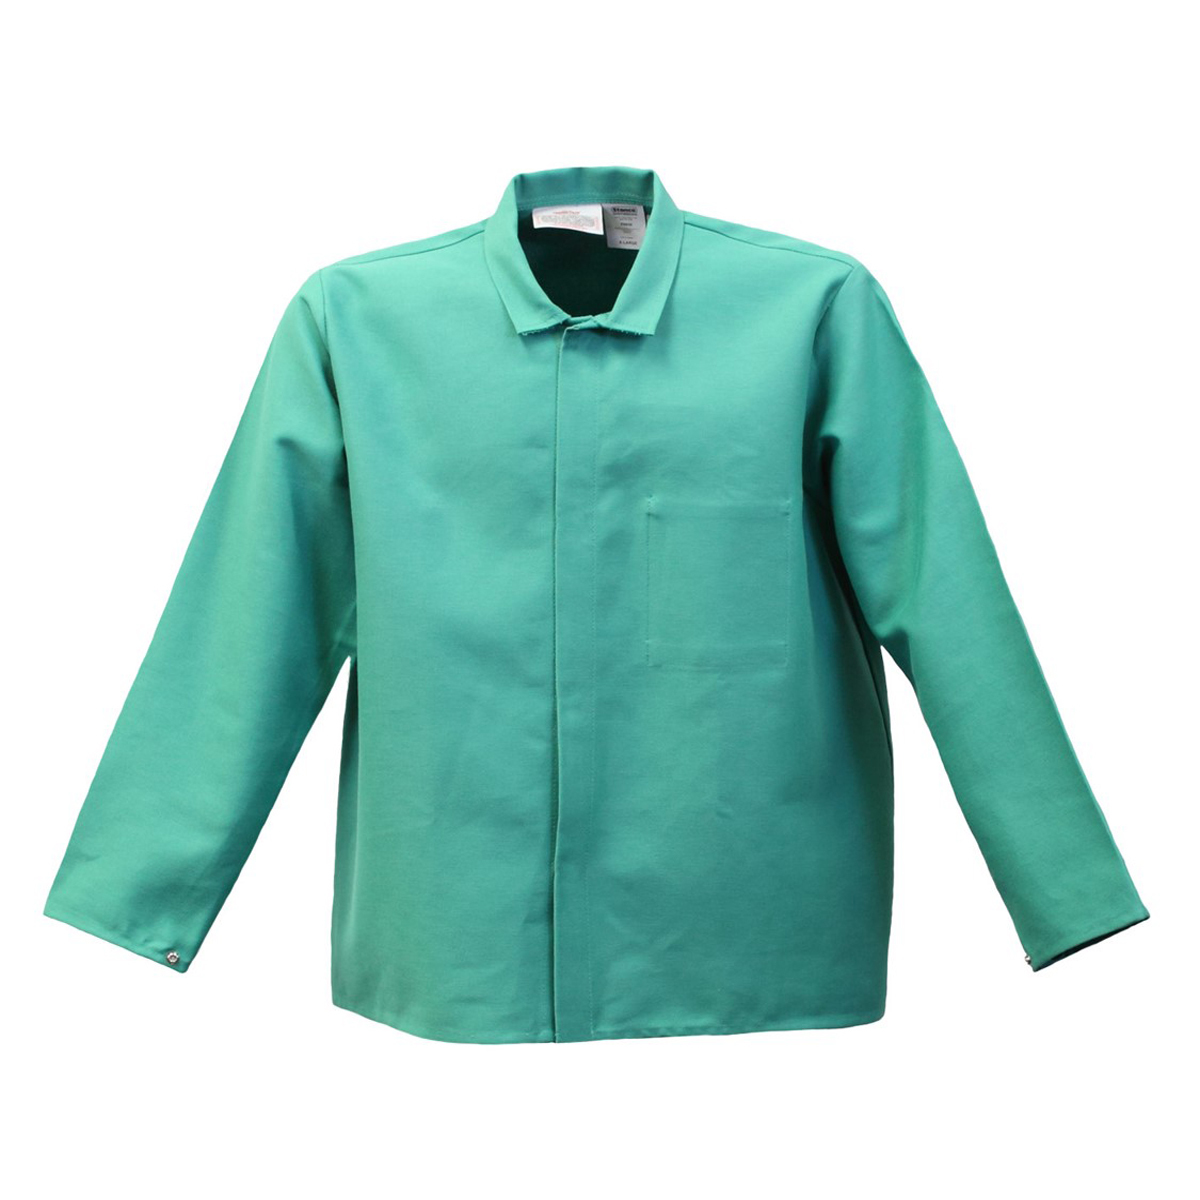 Stanco Safety Products™ Small Green Cotton Flame Resistant Welding Jacket With Hook And Loop Closure And 2